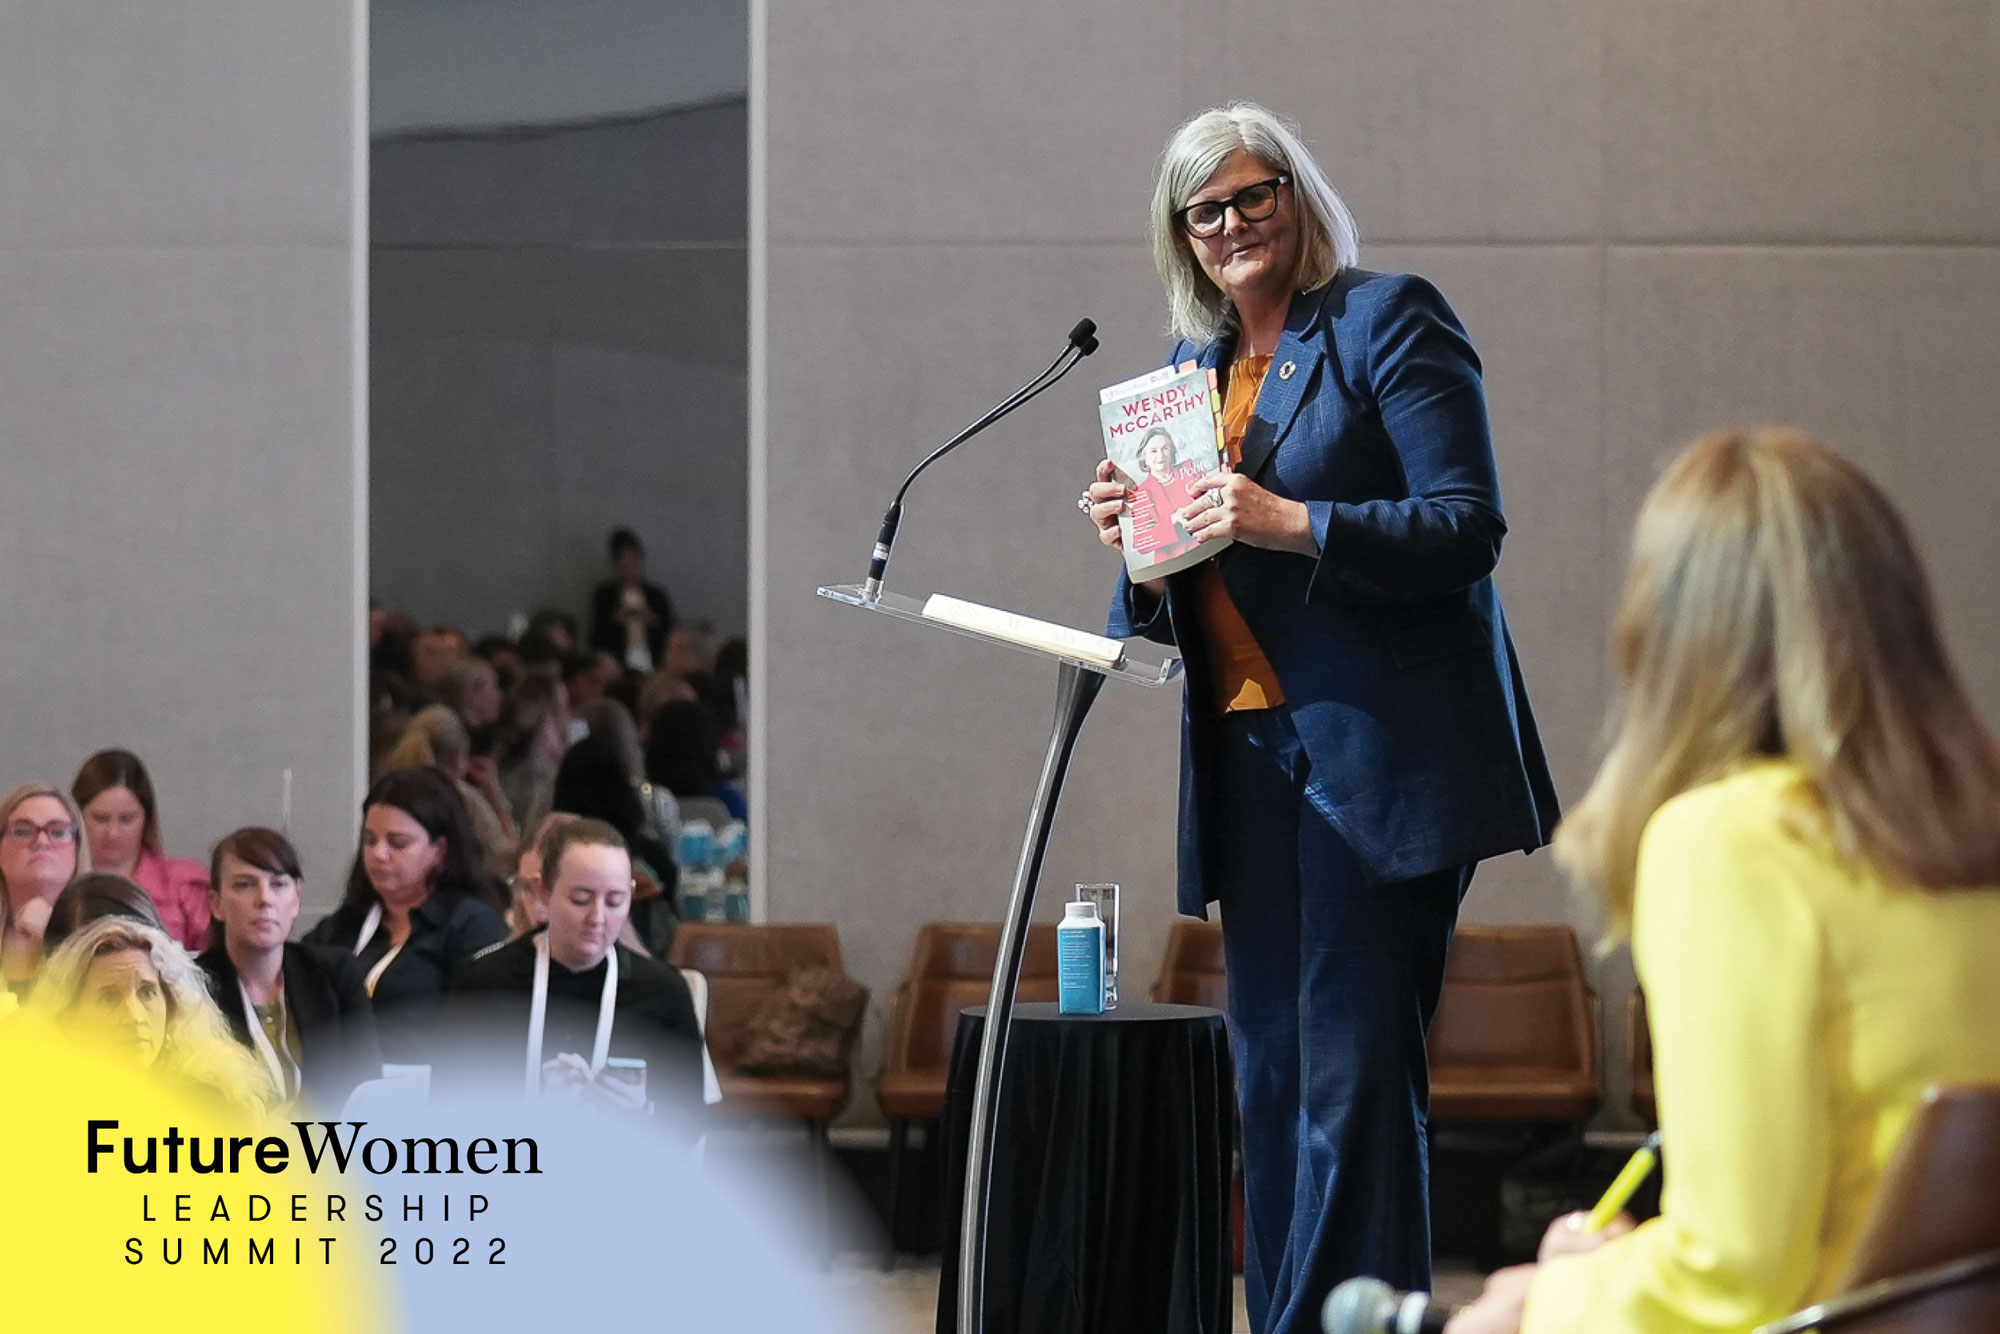 Sam Mostyn offered her advice on how to ask for what you want at the Four Seasons in Sydney